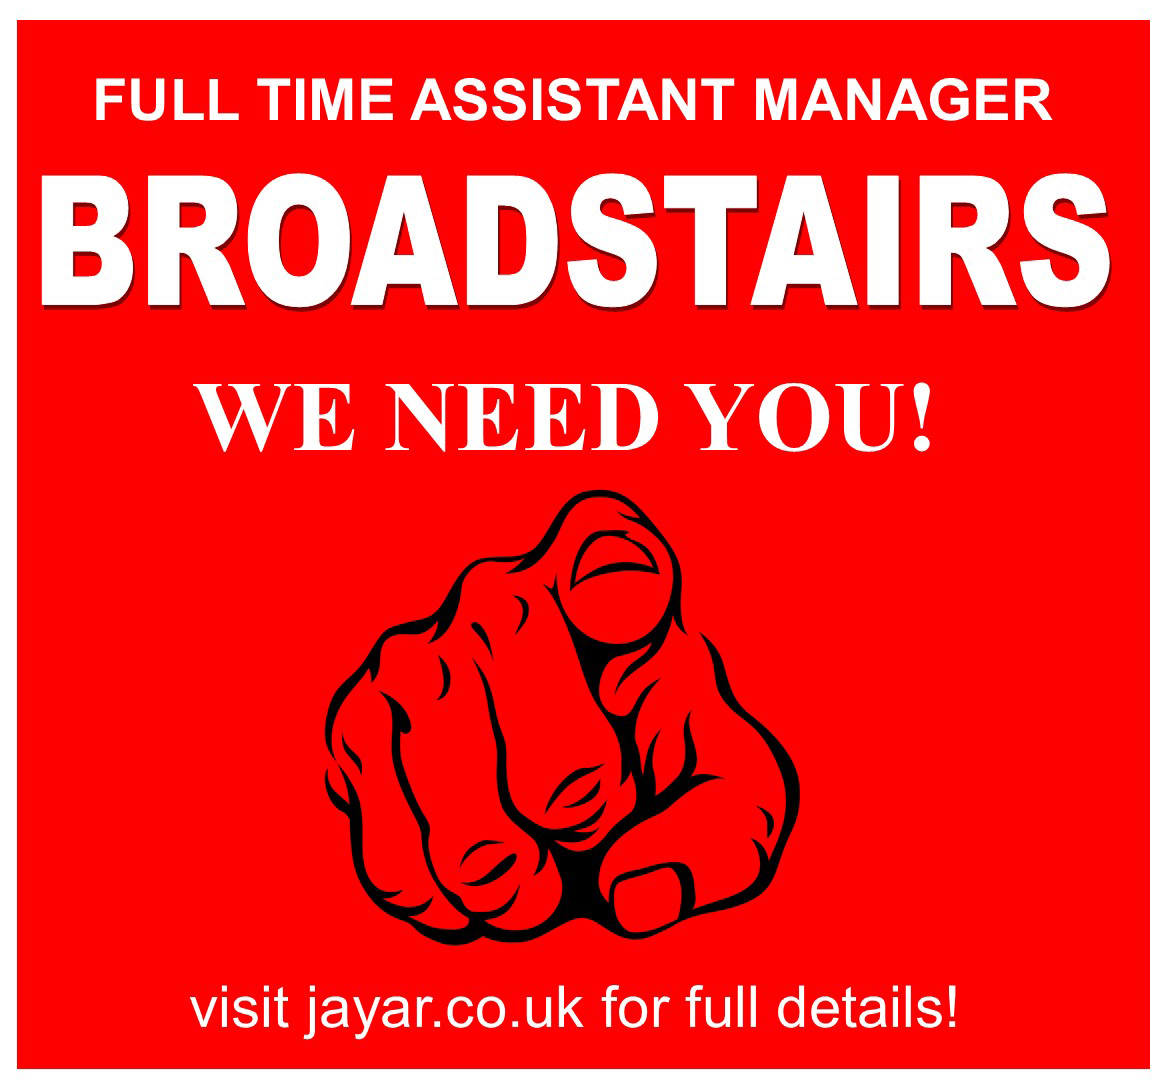 If Car Parts are your passion, then this one could be perfect for you!
We are looking for a full time Assistant Branch Manager for our busy #Broadstairs Branch.
For a detailed job description & to apply, please click here
jayar.co.uk/.../full-time-…
#jobsinkent #kentjobs